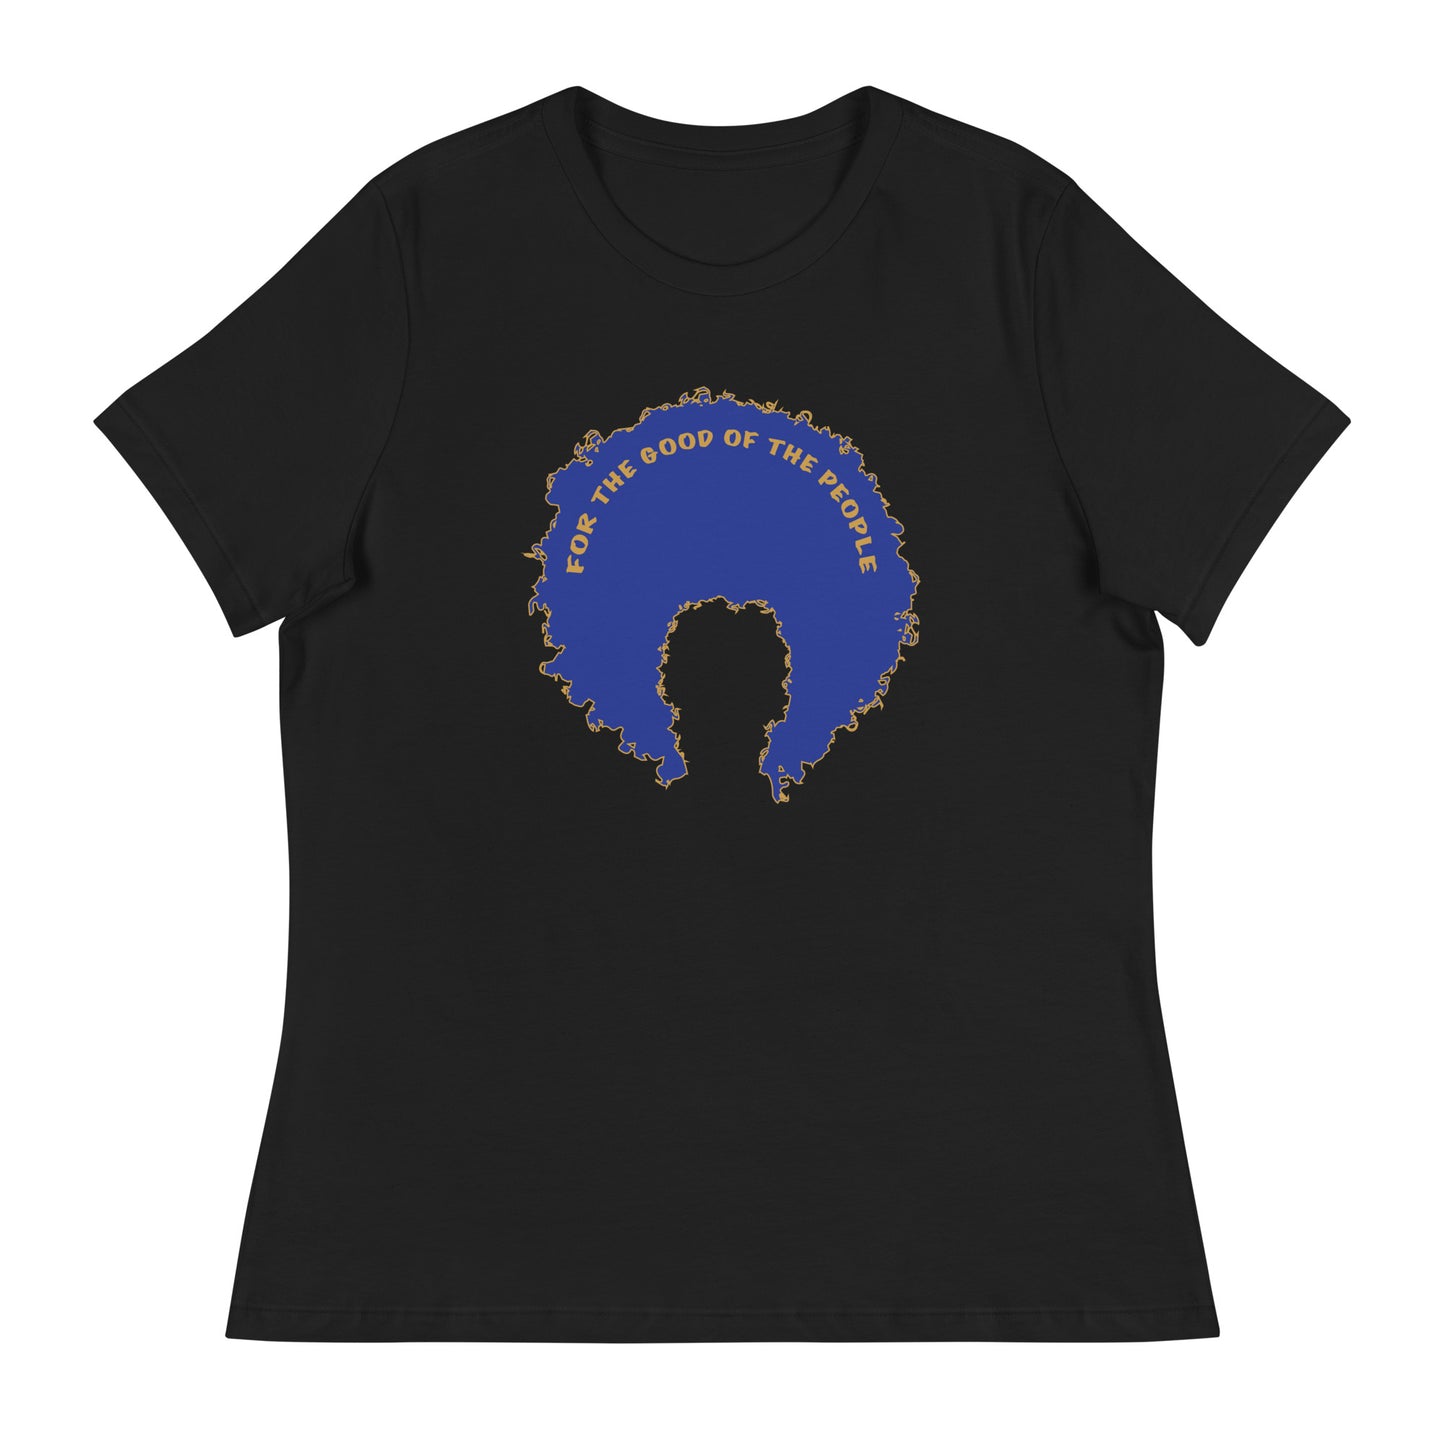 Black women's tee with blue afro graphic trimmed in gold with for the good of the people in gold on the inside top of the afro.